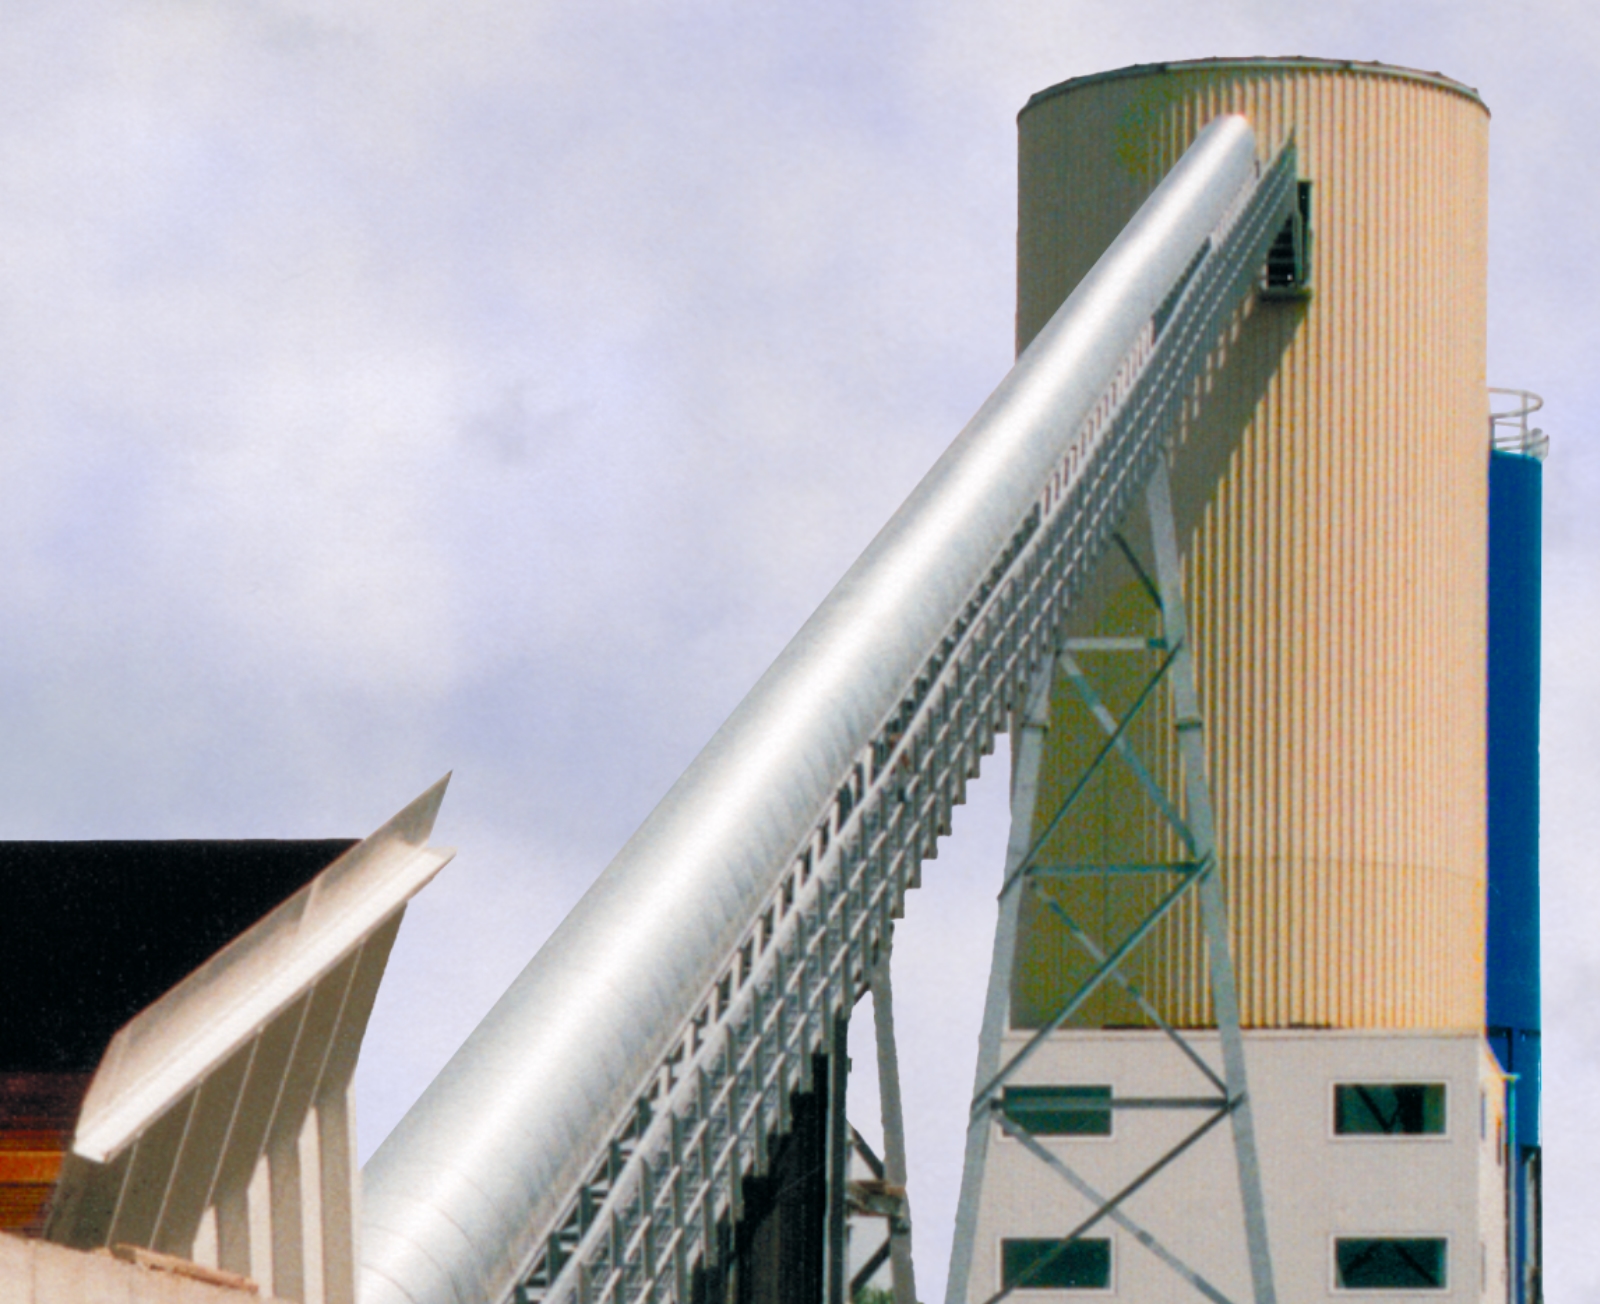 Long inclined conveyor belt with a semicircular cover from a feed hopper to a high cylindrical mixing tower.